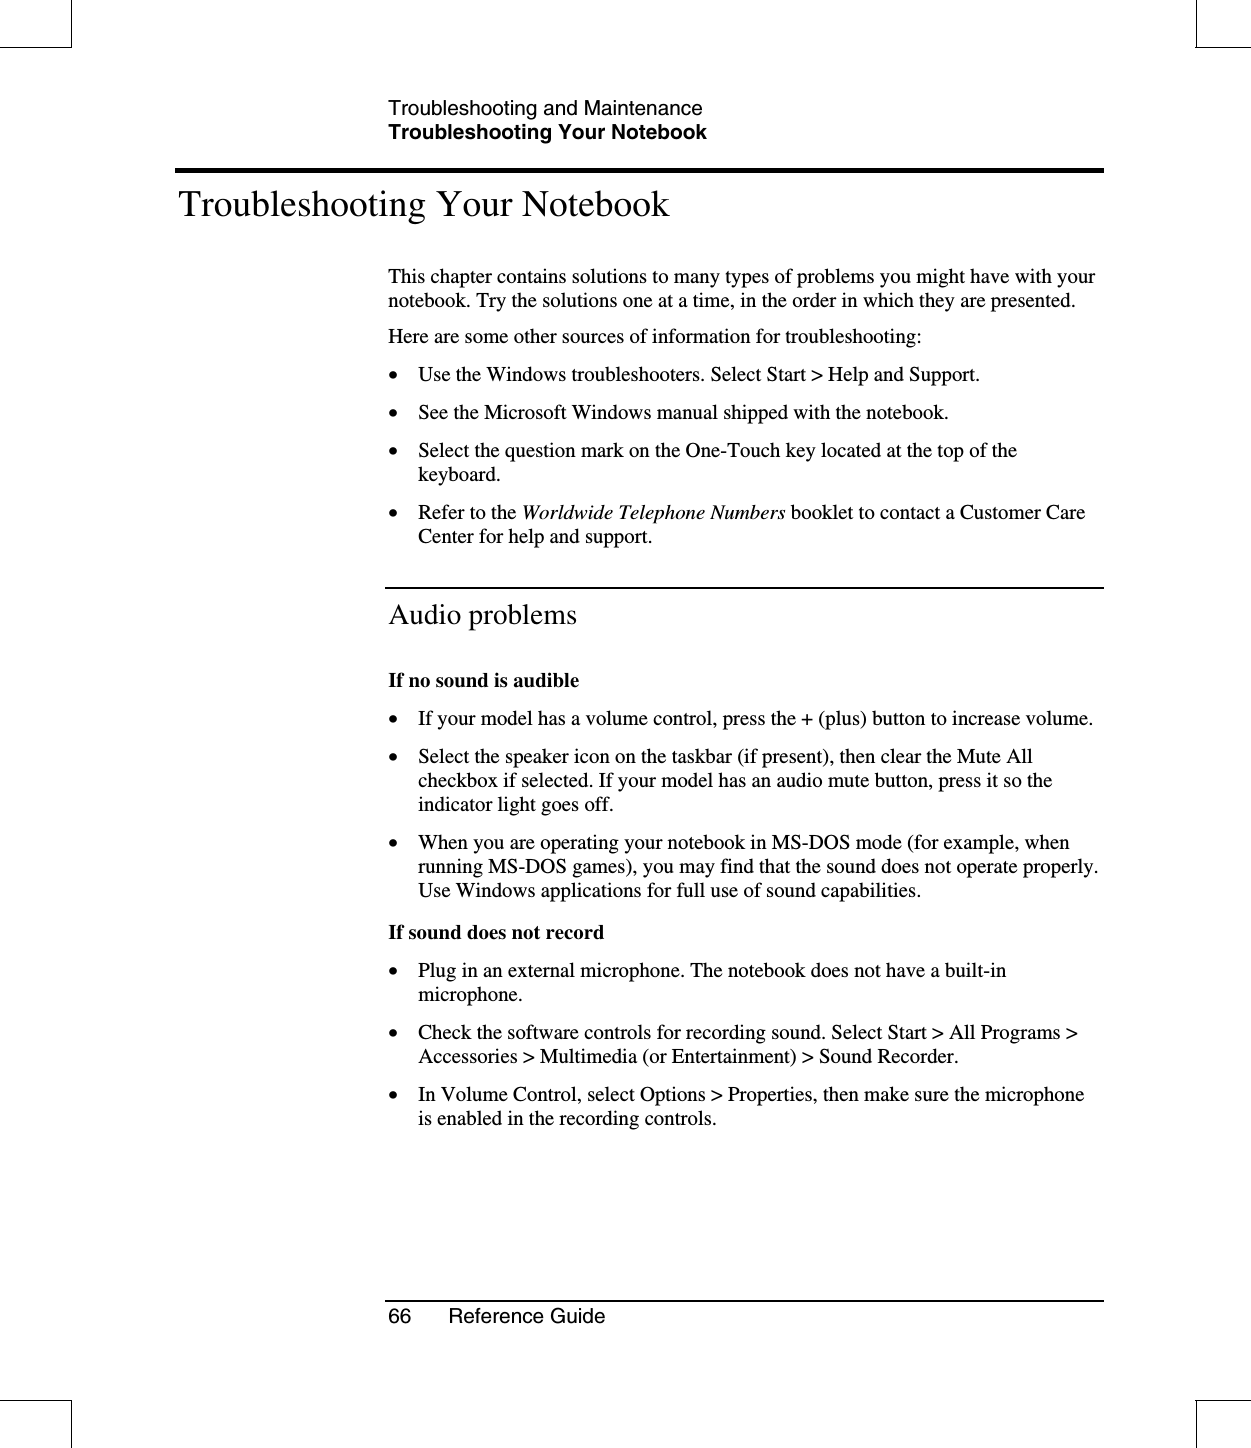 Troubleshooting and MaintenanceTroubleshooting Your Notebook66 Reference GuideTroubleshooting Your NotebookThis chapter contains solutions to many types of problems you might have with yournotebook. Try the solutions one at a time, in the order in which they are presented.Here are some other sources of information for troubleshooting:•  Use the Windows troubleshooters. Select Start &gt; Help and Support.•  See the Microsoft Windows manual shipped with the notebook.•  Select the question mark on the One-Touch key located at the top of thekeyboard.•  Refer to the Worldwide Telephone Numbers booklet to contact a Customer CareCenter for help and support.Audio problemsIf no sound is audible•  If your model has a volume control, press the + (plus) button to increase volume.•  Select the speaker icon on the taskbar (if present), then clear the Mute Allcheckbox if selected. If your model has an audio mute button, press it so theindicator light goes off.•  When you are operating your notebook in MS-DOS mode (for example, whenrunning MS-DOS games), you may find that the sound does not operate properly.Use Windows applications for full use of sound capabilities.If sound does not record•  Plug in an external microphone. The notebook does not have a built-inmicrophone.•  Check the software controls for recording sound. Select Start &gt; All Programs &gt;Accessories &gt; Multimedia (or Entertainment) &gt; Sound Recorder.•  In Volume Control, select Options &gt; Properties, then make sure the microphoneis enabled in the recording controls.